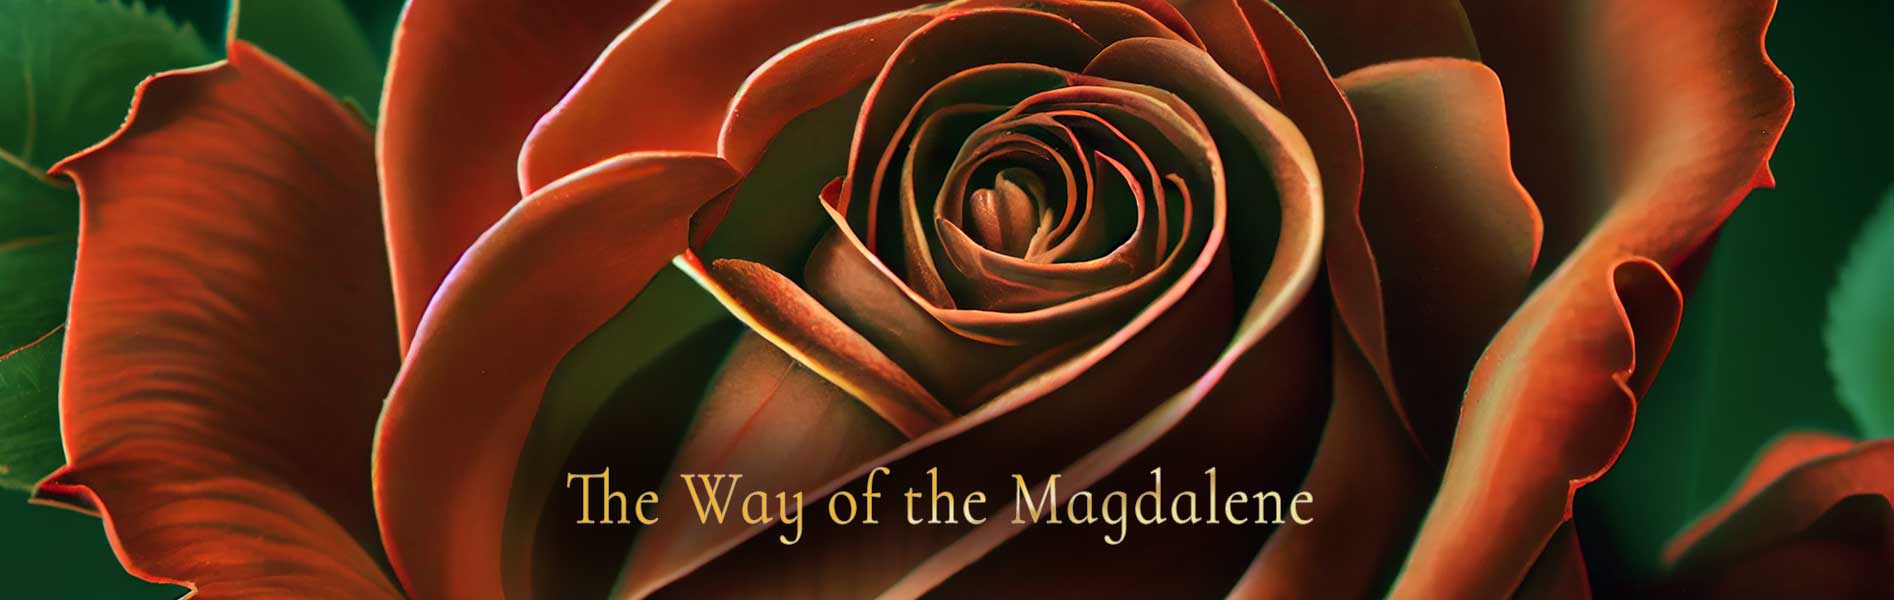 the-way-of-the-magdalene